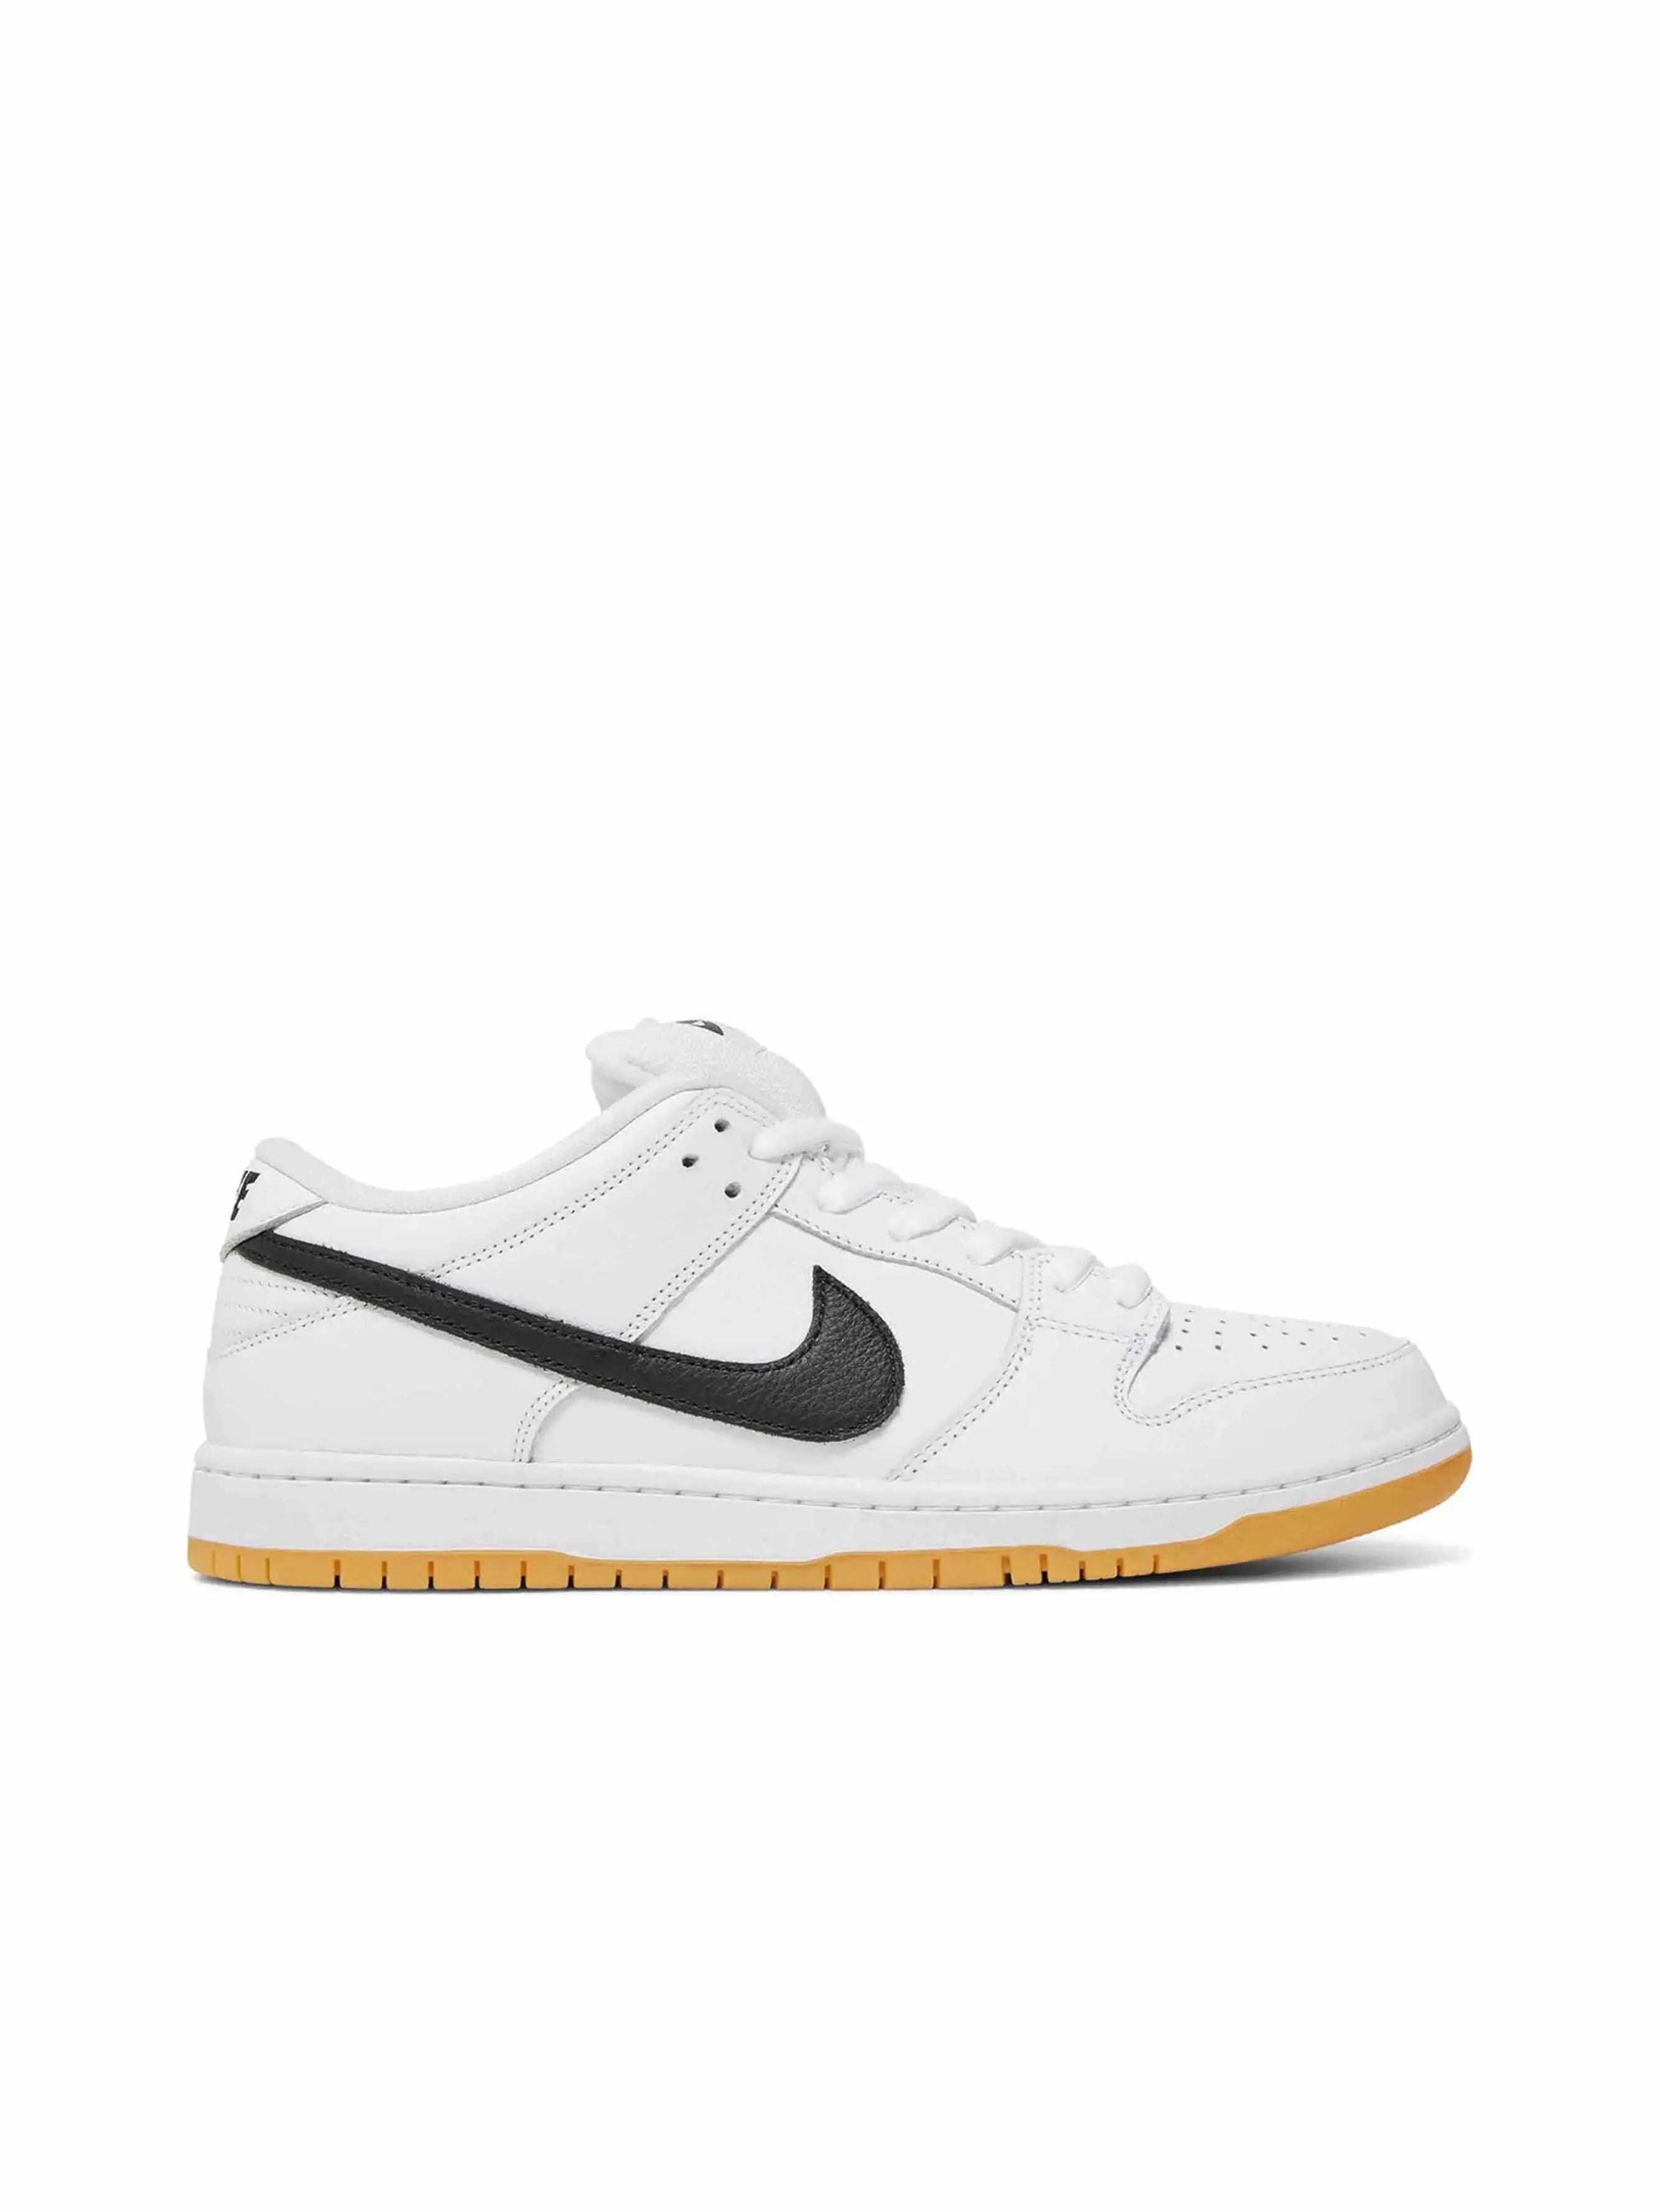 Buy Nike SB Dunk Low Pro White Gum Online in Auckland, New Zealand ...